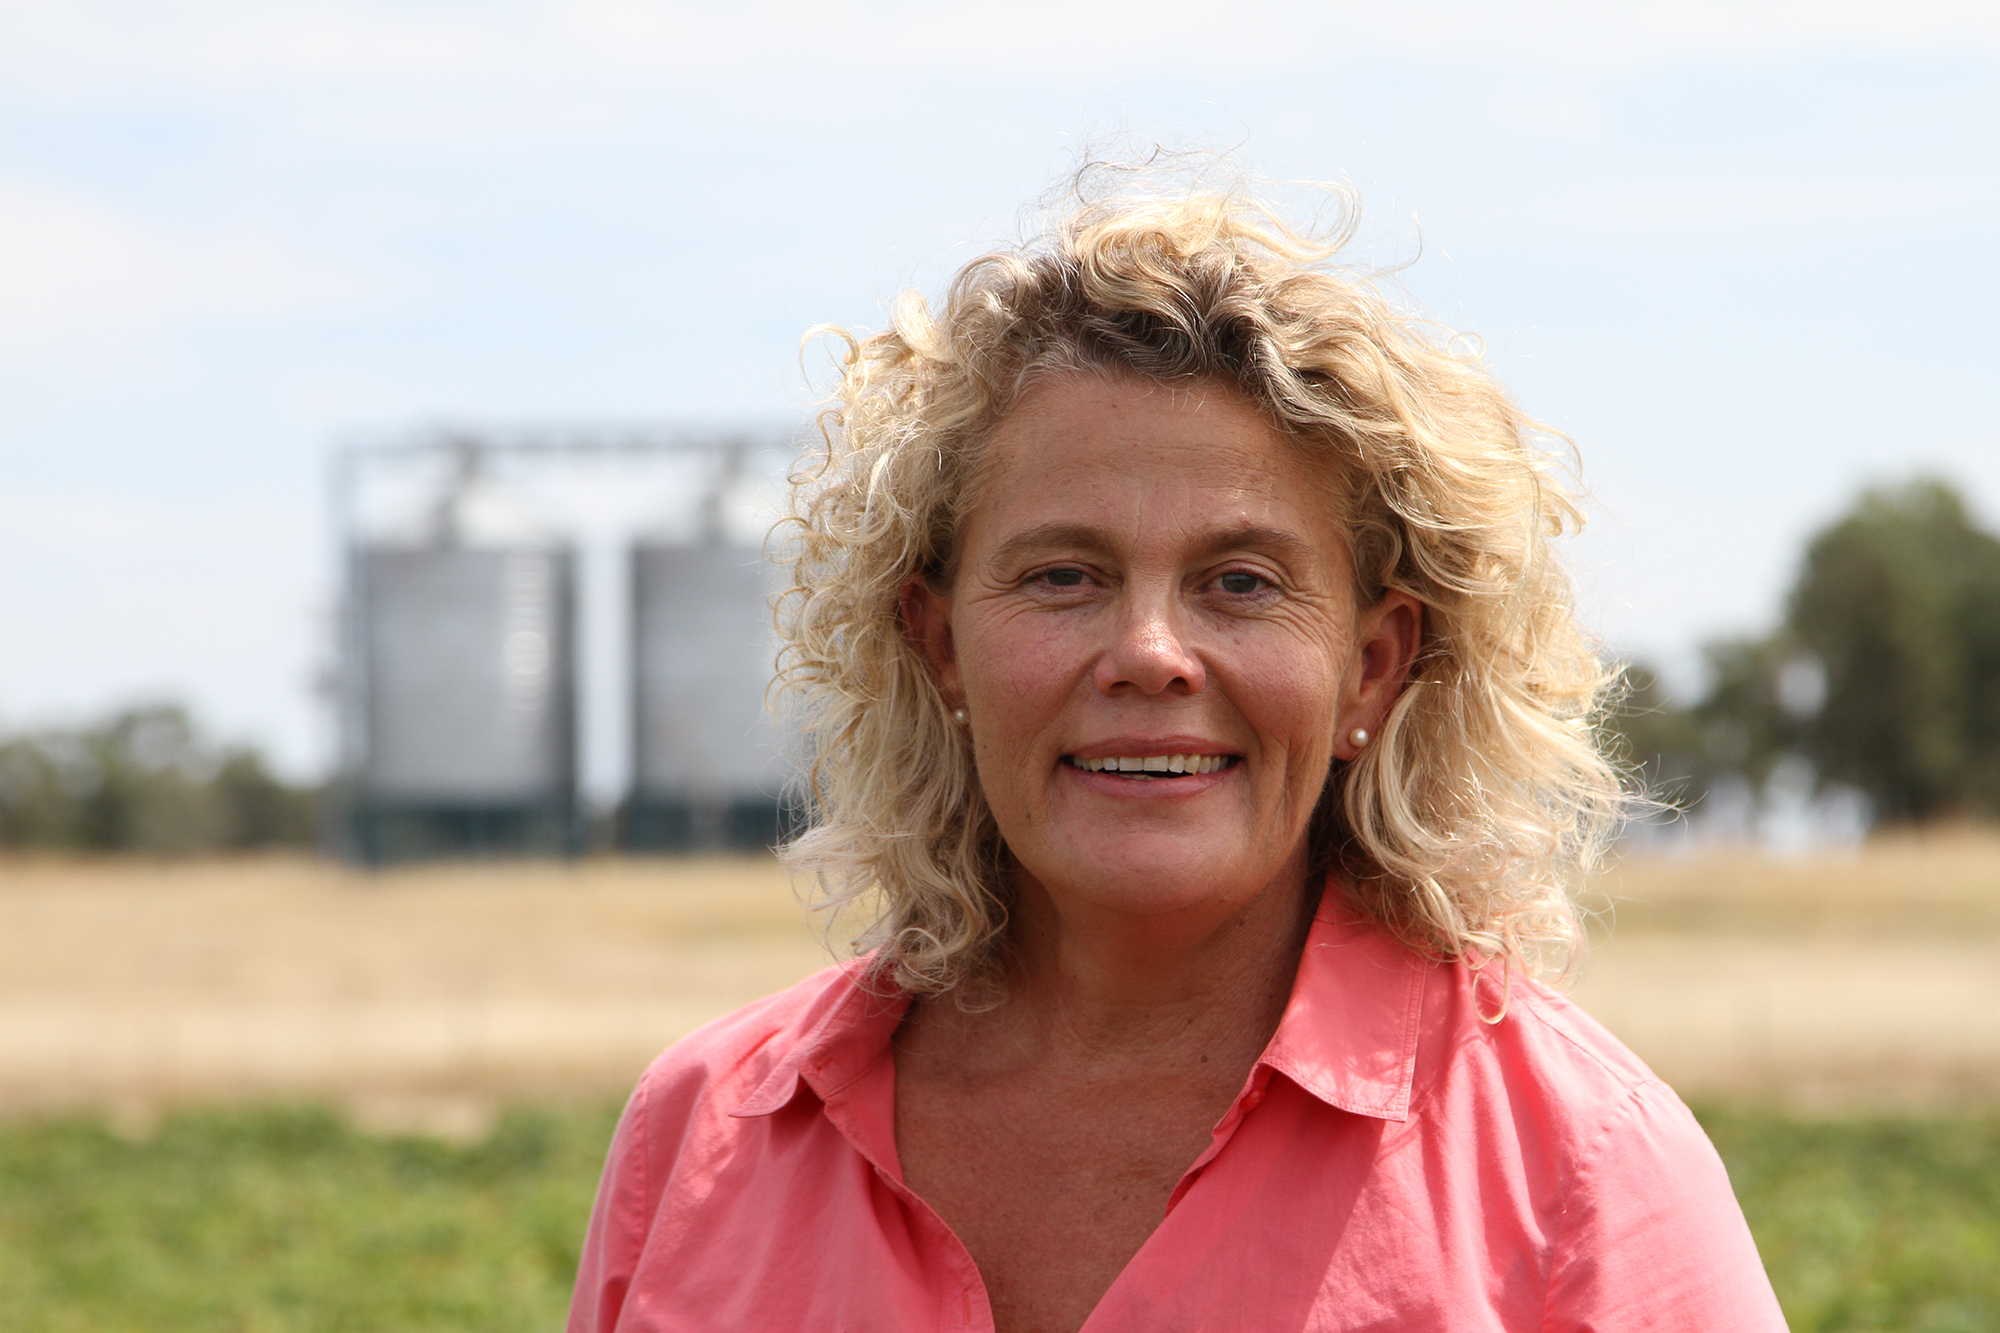 The National Farmers’ Federation’s first female President stepped down on 25 October to take on a global advocacy role as a Director of the World Farmers’ Organisation.